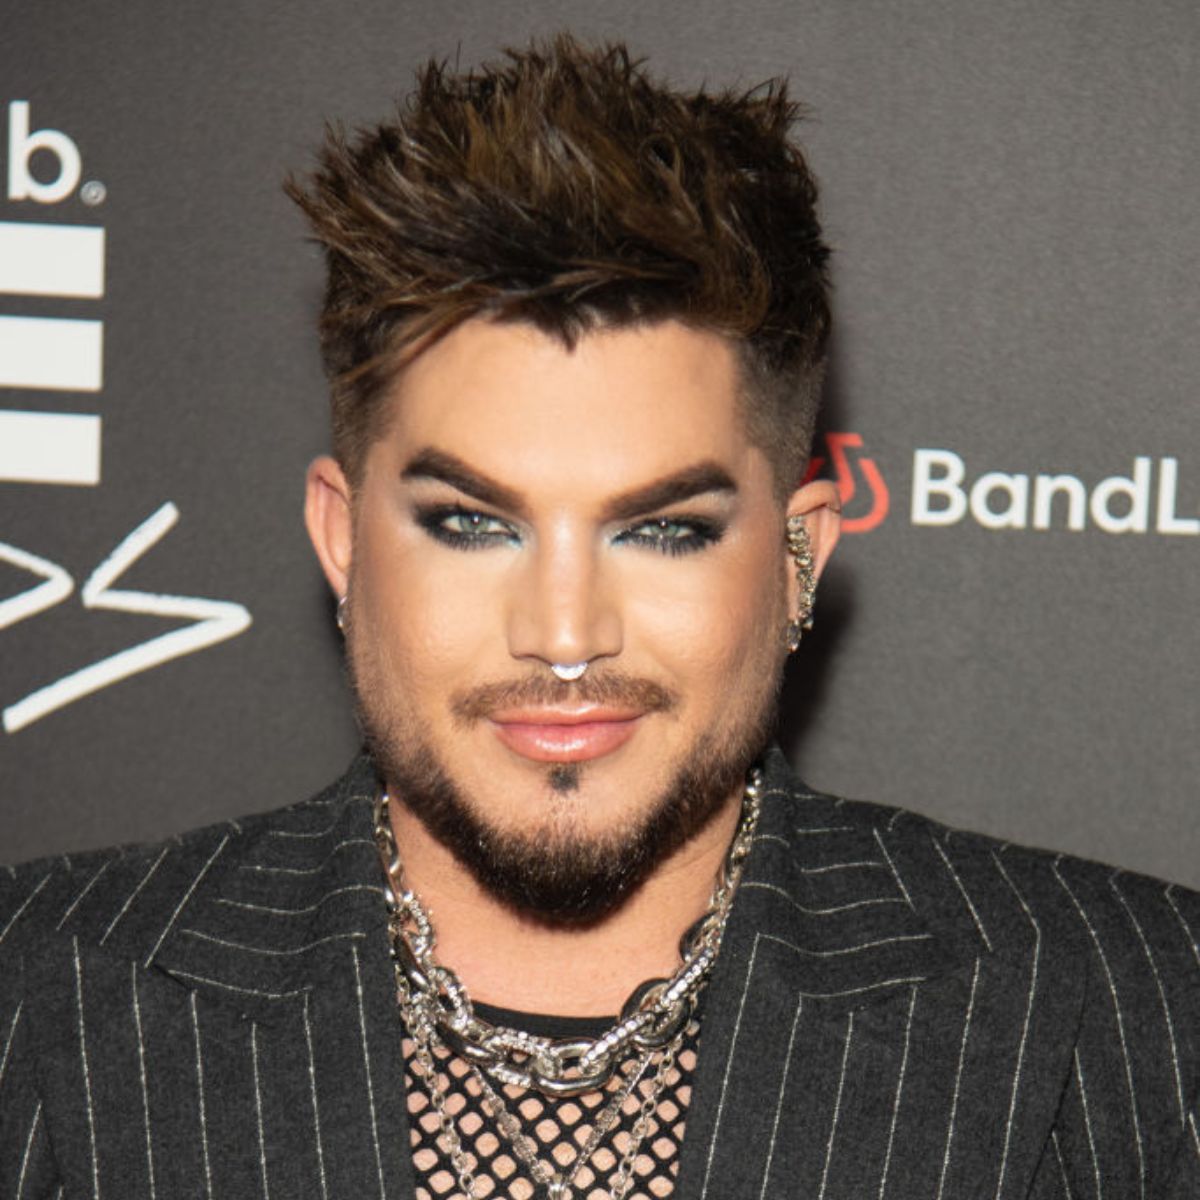 Where Does Adam Lambert Live And How Big Is His House?